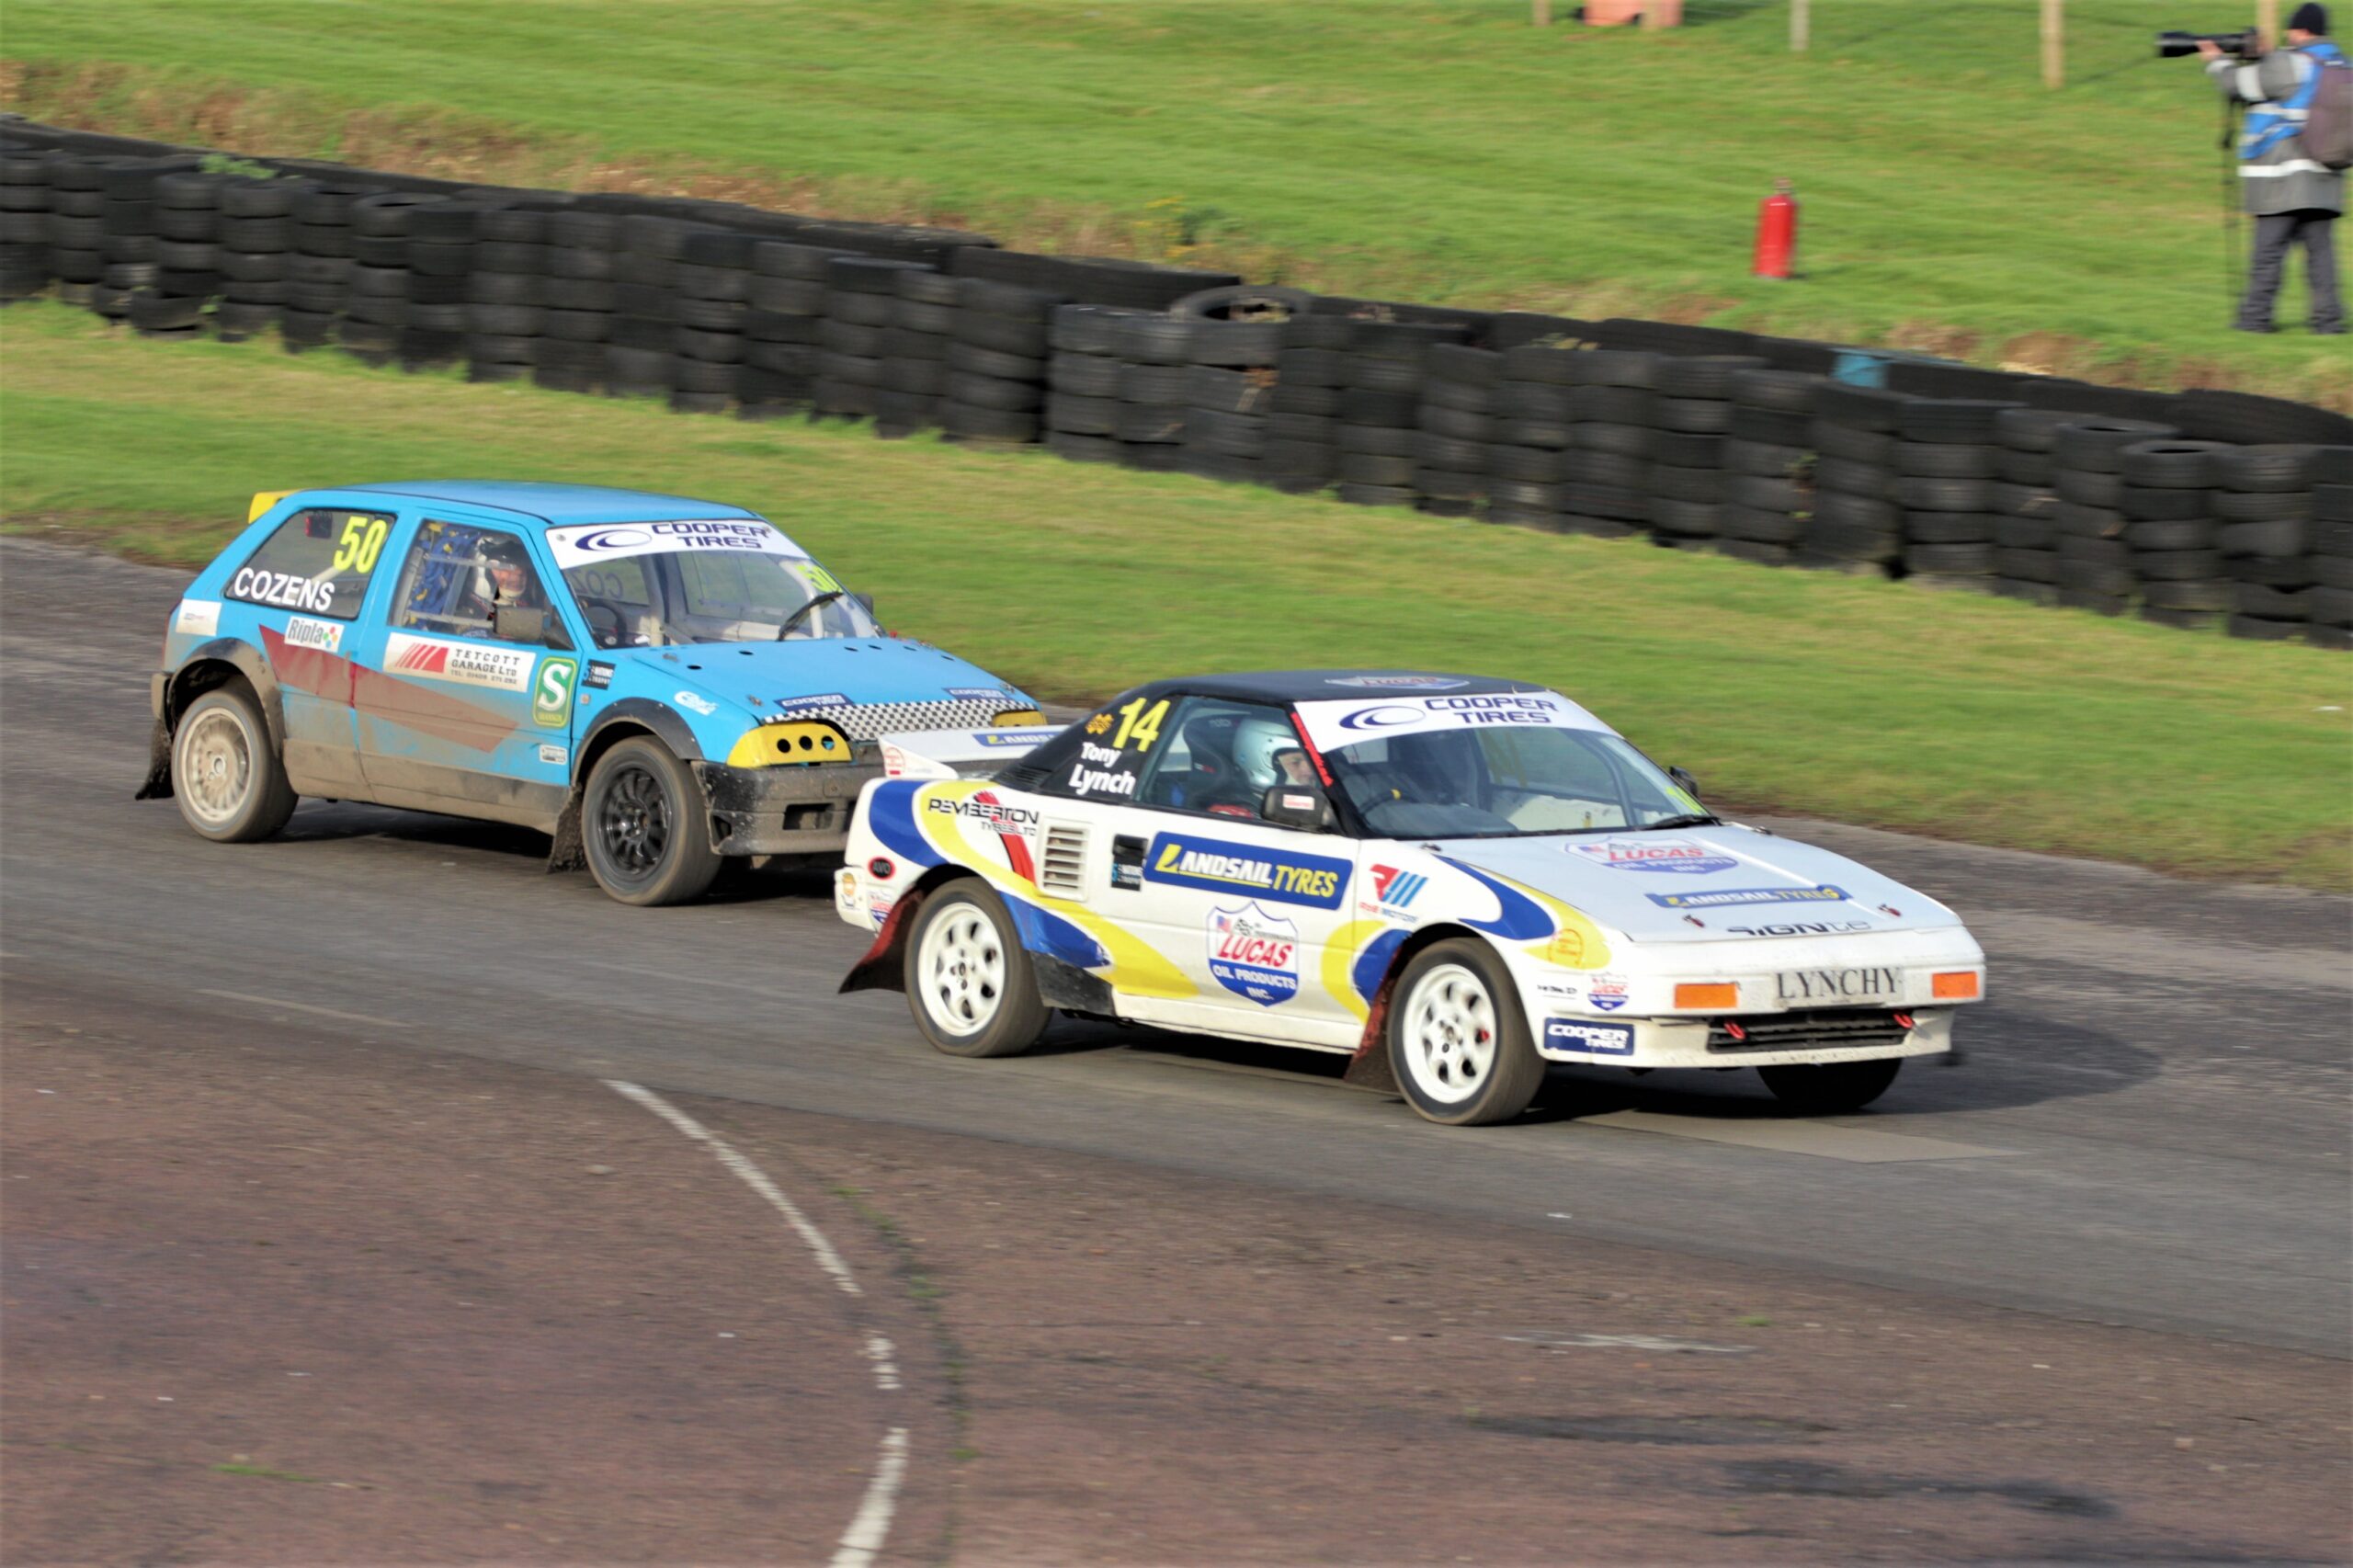 Mixed fortunes for Tony Lynch at Lydden